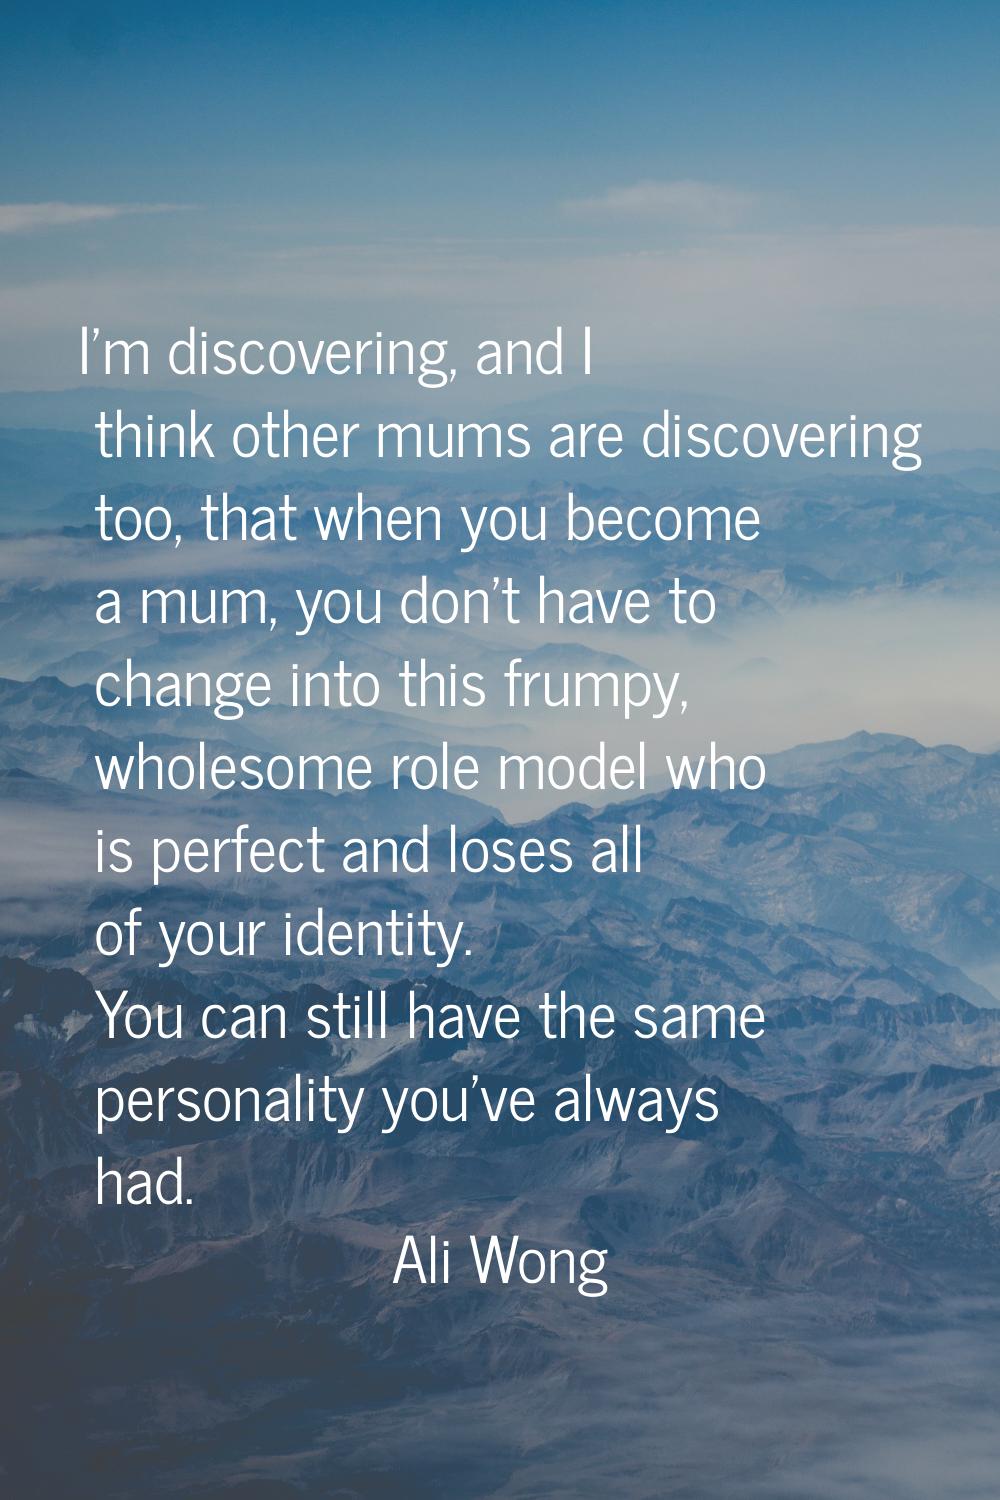 I'm discovering, and I think other mums are discovering too, that when you become a mum, you don't 